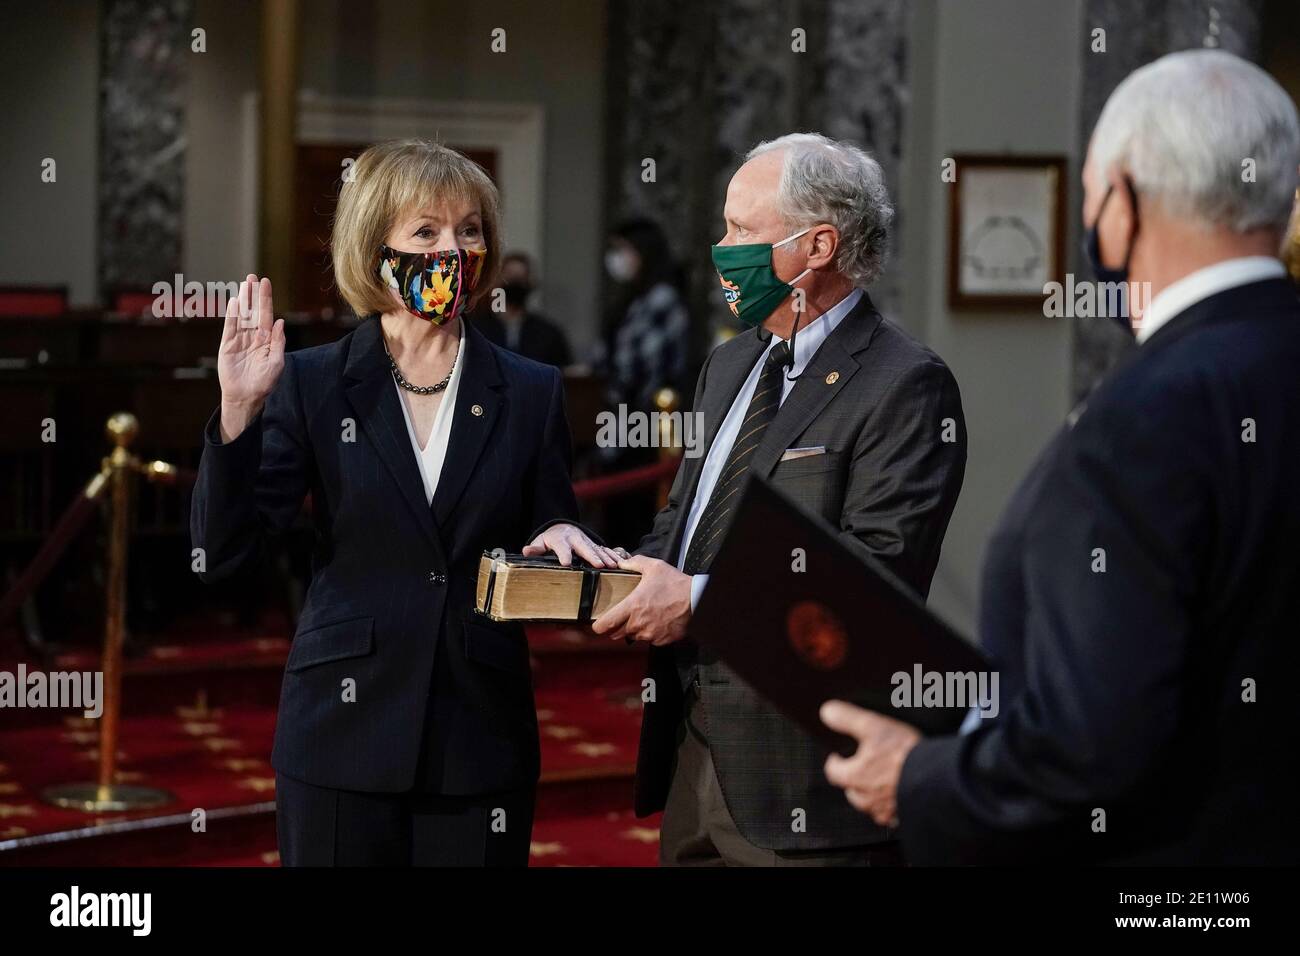 Washington, USA. 03rd Jan, 2021. Sen. Tina Smith, D-Minn., joined by her husband Archie Smith, takes the oath of office from Vice President Mike Pence during a reenactment ceremony in the Old Senate Chamber at the Capitol in Washington, Sunday, Jan. 3, 2021. (Photo by J. Scott Applewhite/Pool/Sipa USA) Credit: Sipa USA/Alamy Live News Stock Photo